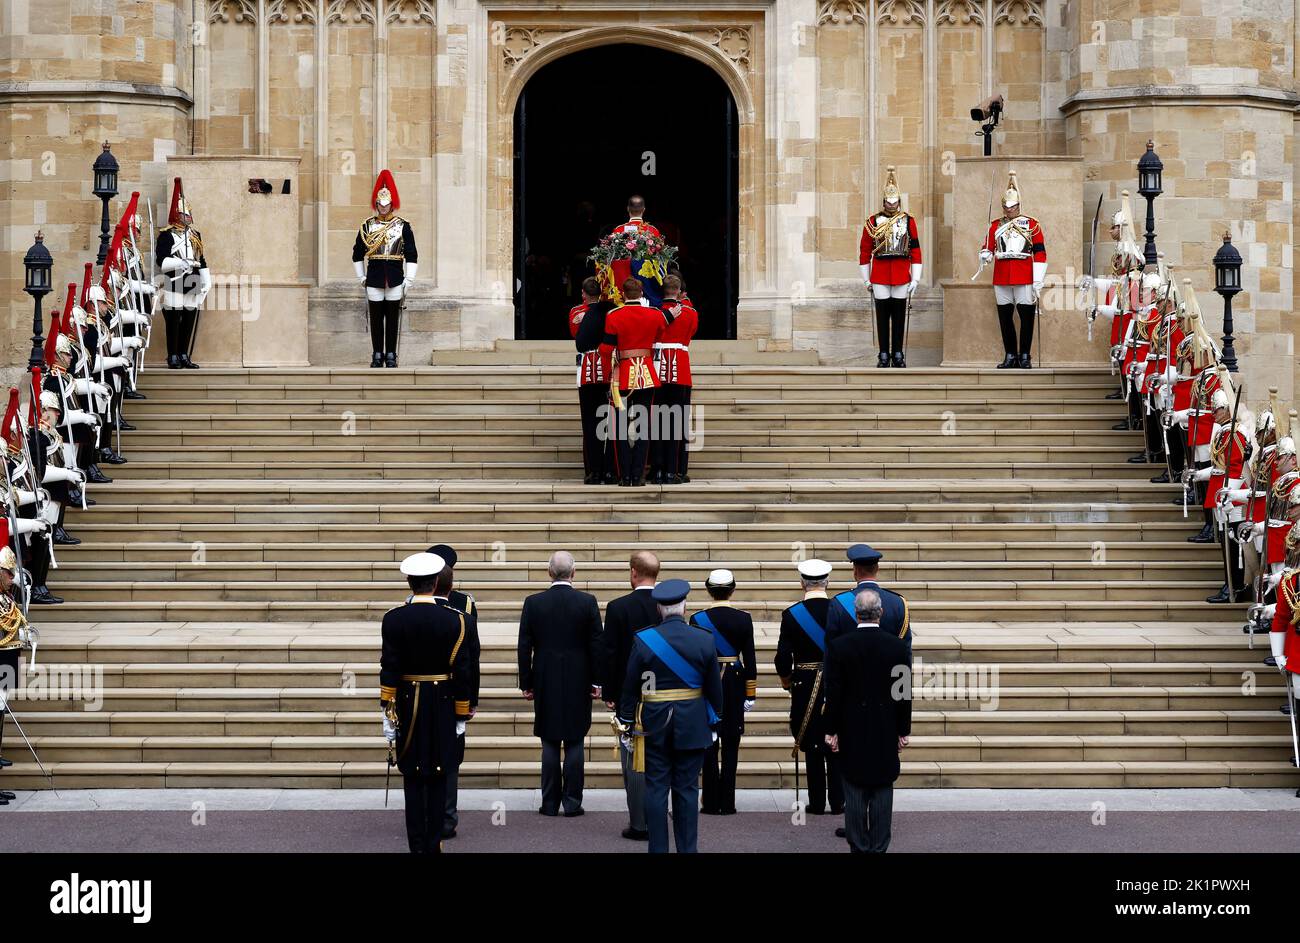 King Charles III, the Princess Royal, the Duke of York, the Earl of Wessex, the Prince of Wales, the Duke of Sussex, Peter Phillips, the Earl of Snowden, the Duke of Gloucester and Vice Admiral Sir Tim Laurence watch as coffin bearers carry the coffin of Queen Elizabeth II into St George's Chapel in Windsor Castle, Berkshire, as it arrives for the Committal Service. Picture date: Monday September 19, 2022. Stock Photo